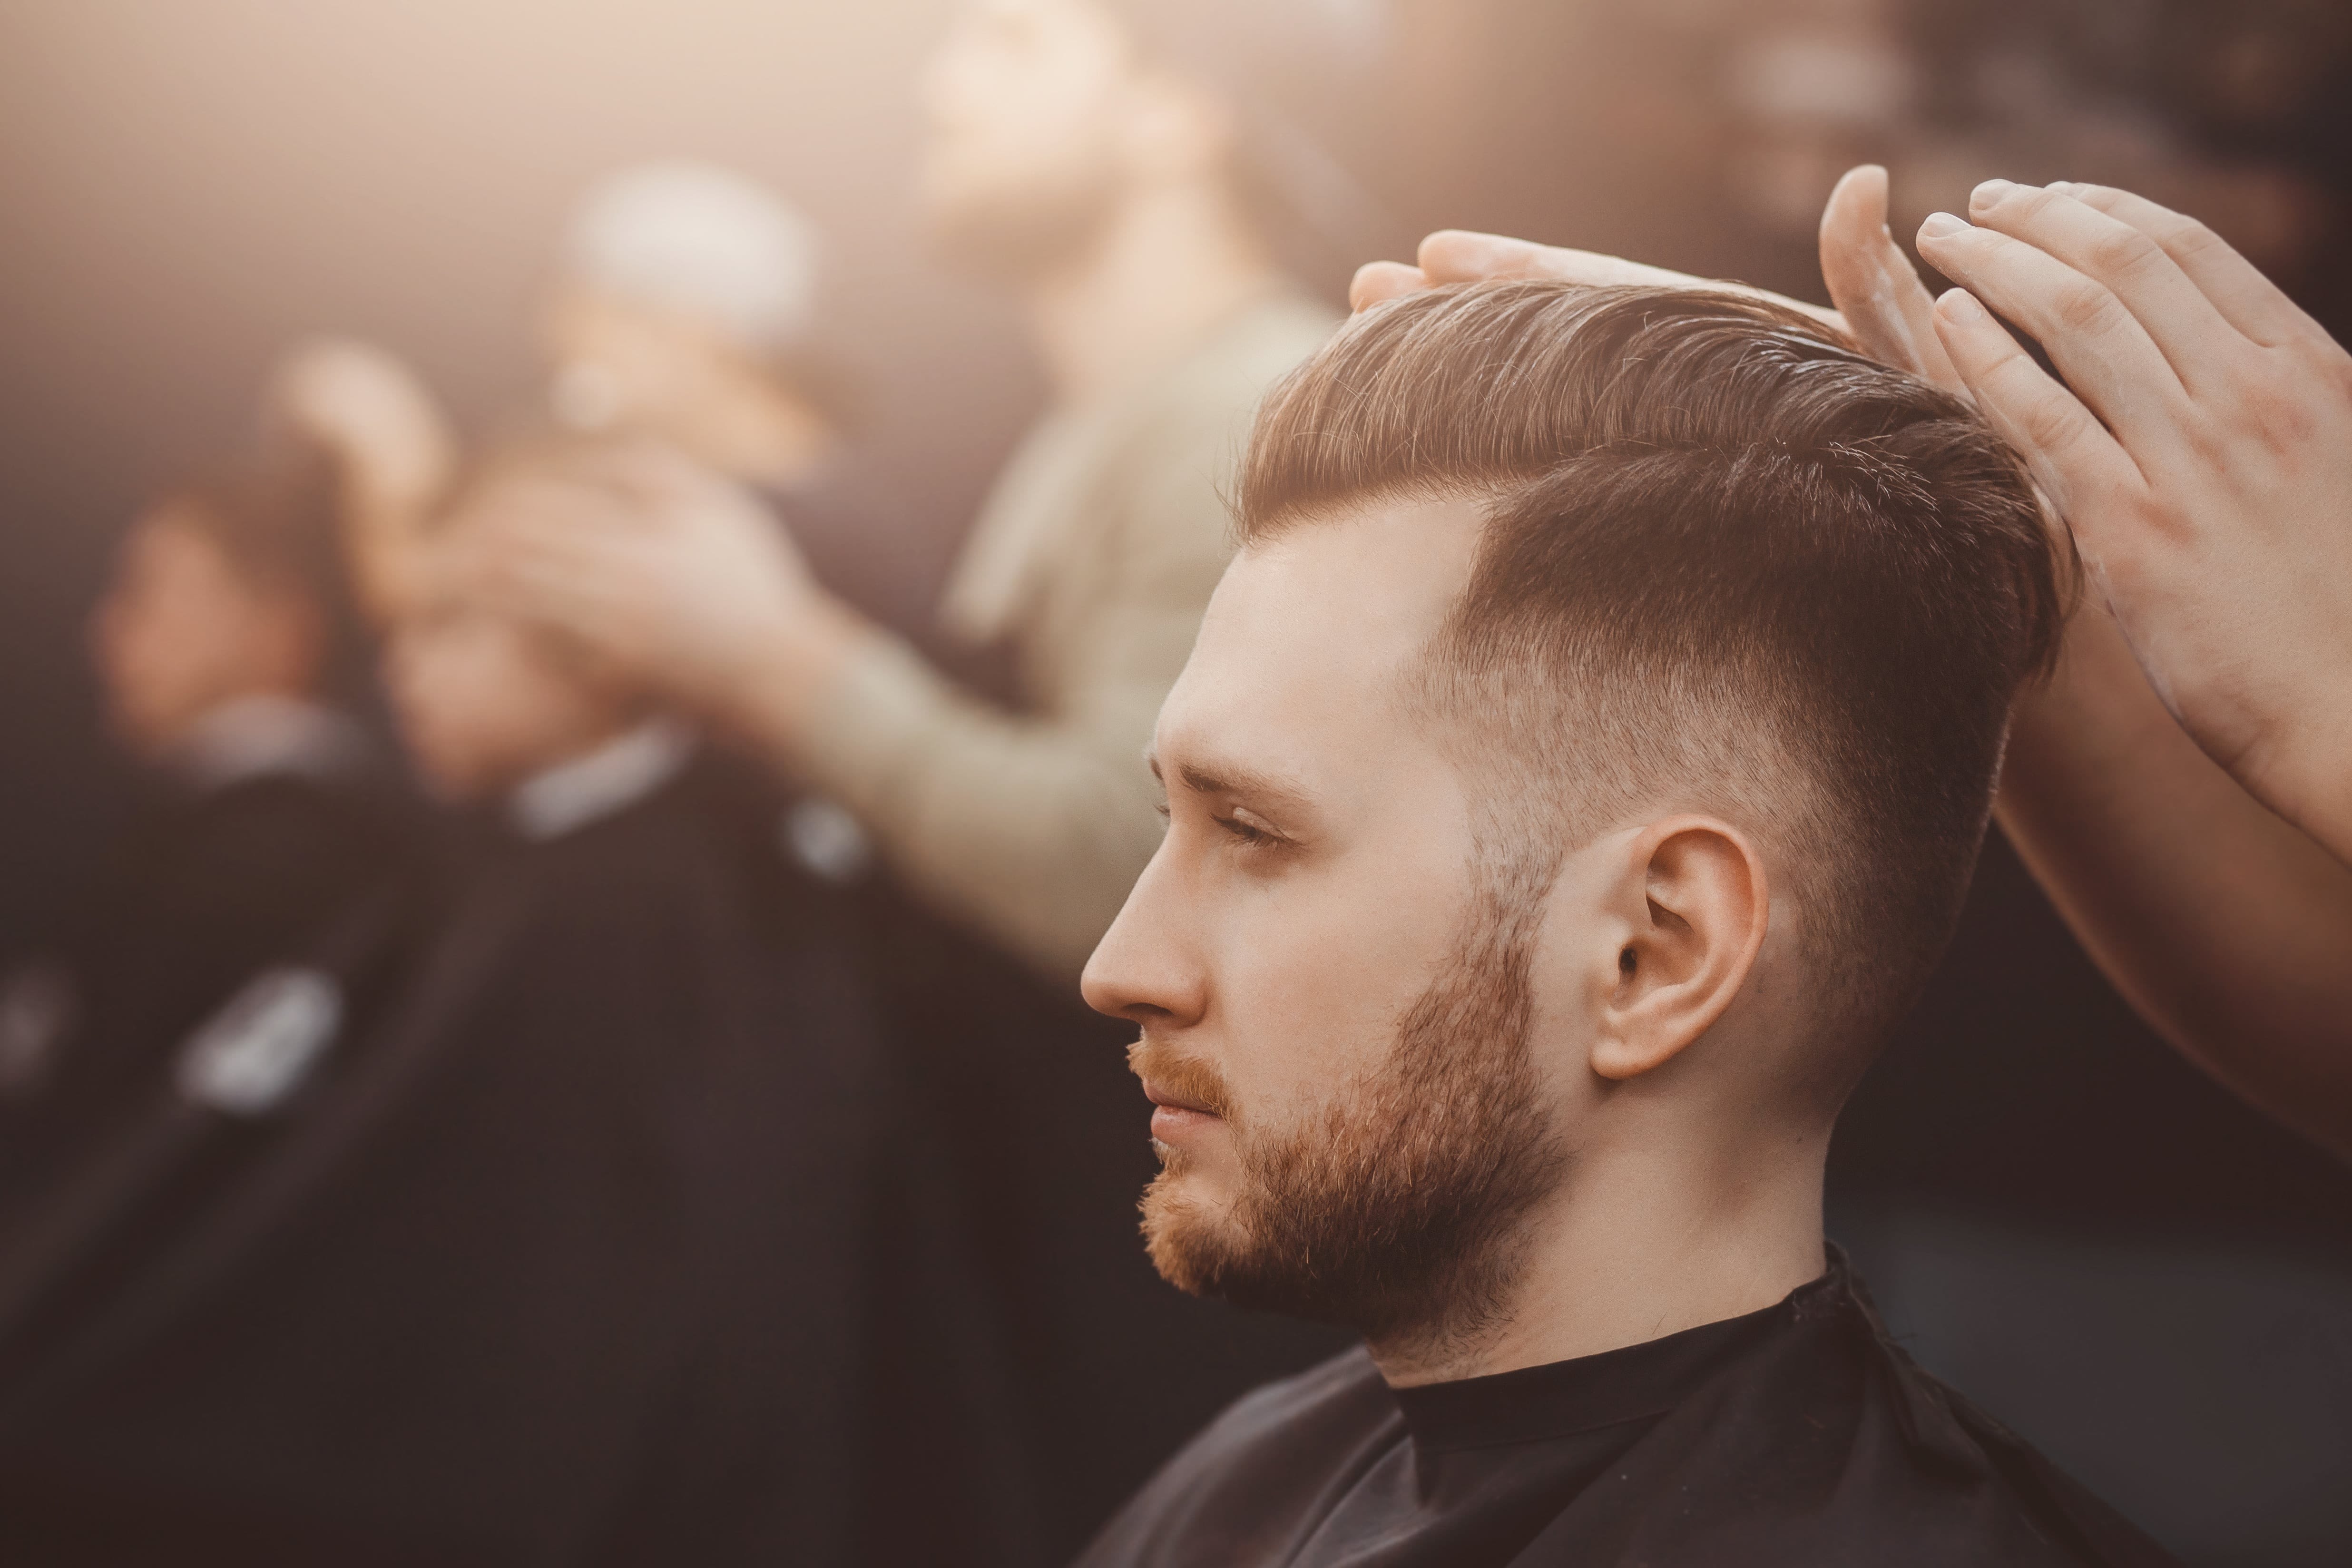 Discover the Latest Mens Haircut Trends at Judes Barbershop